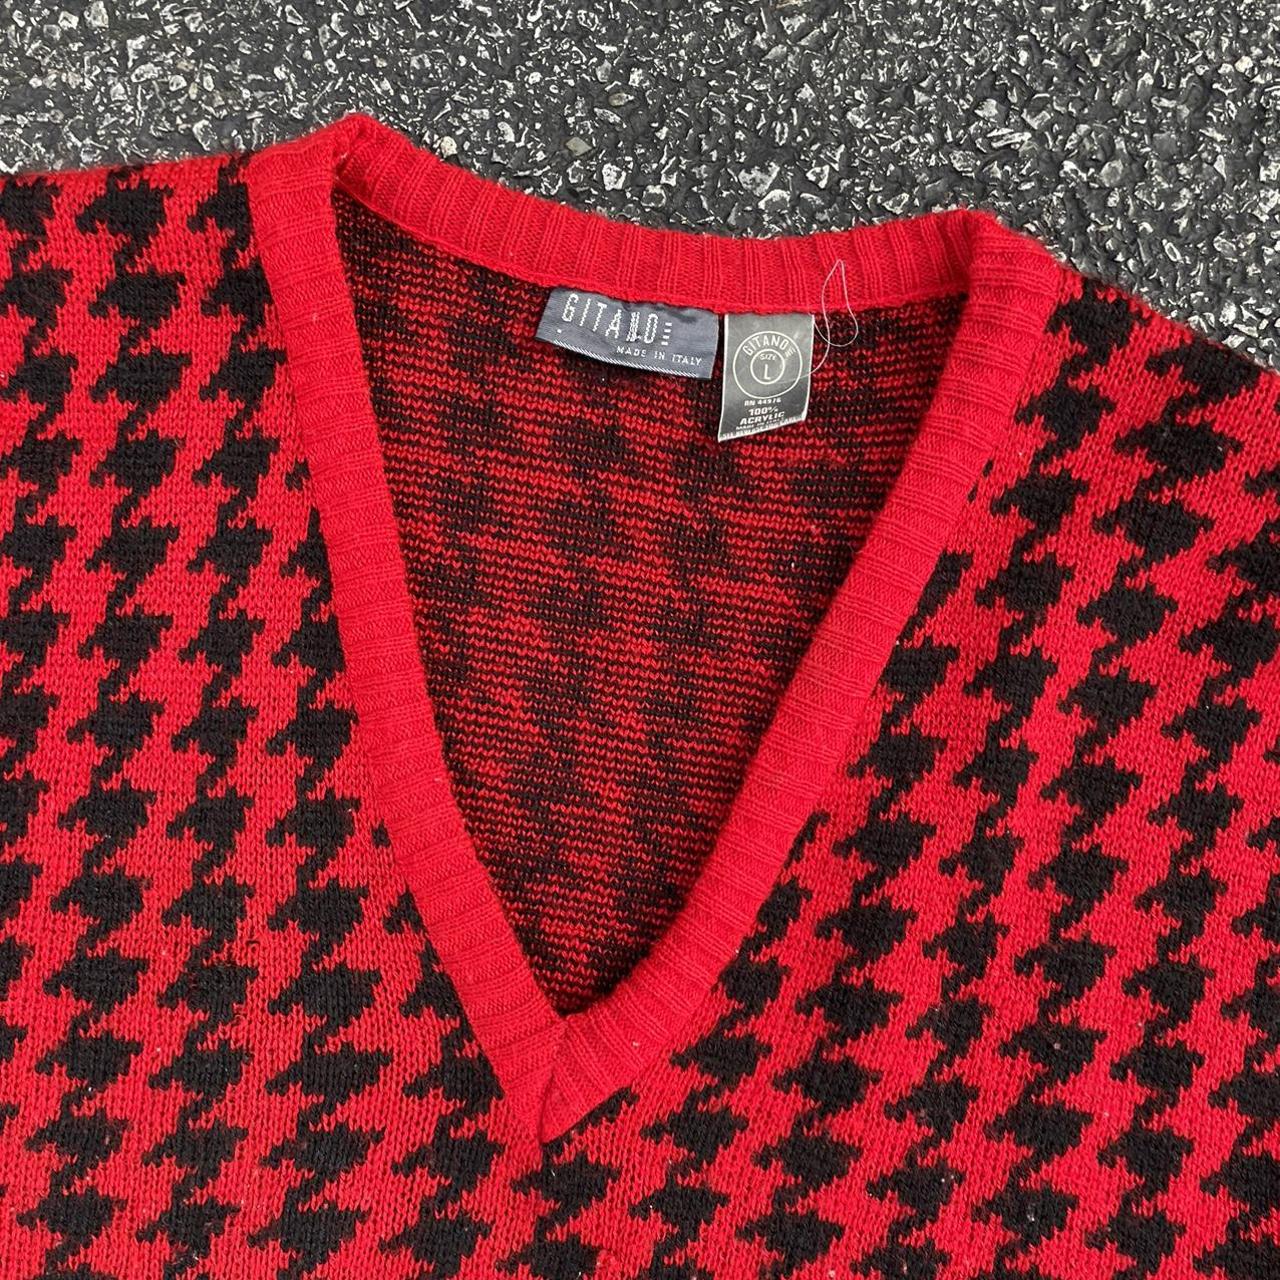 Product Image 3 - Vintage 90s red patterned sweater